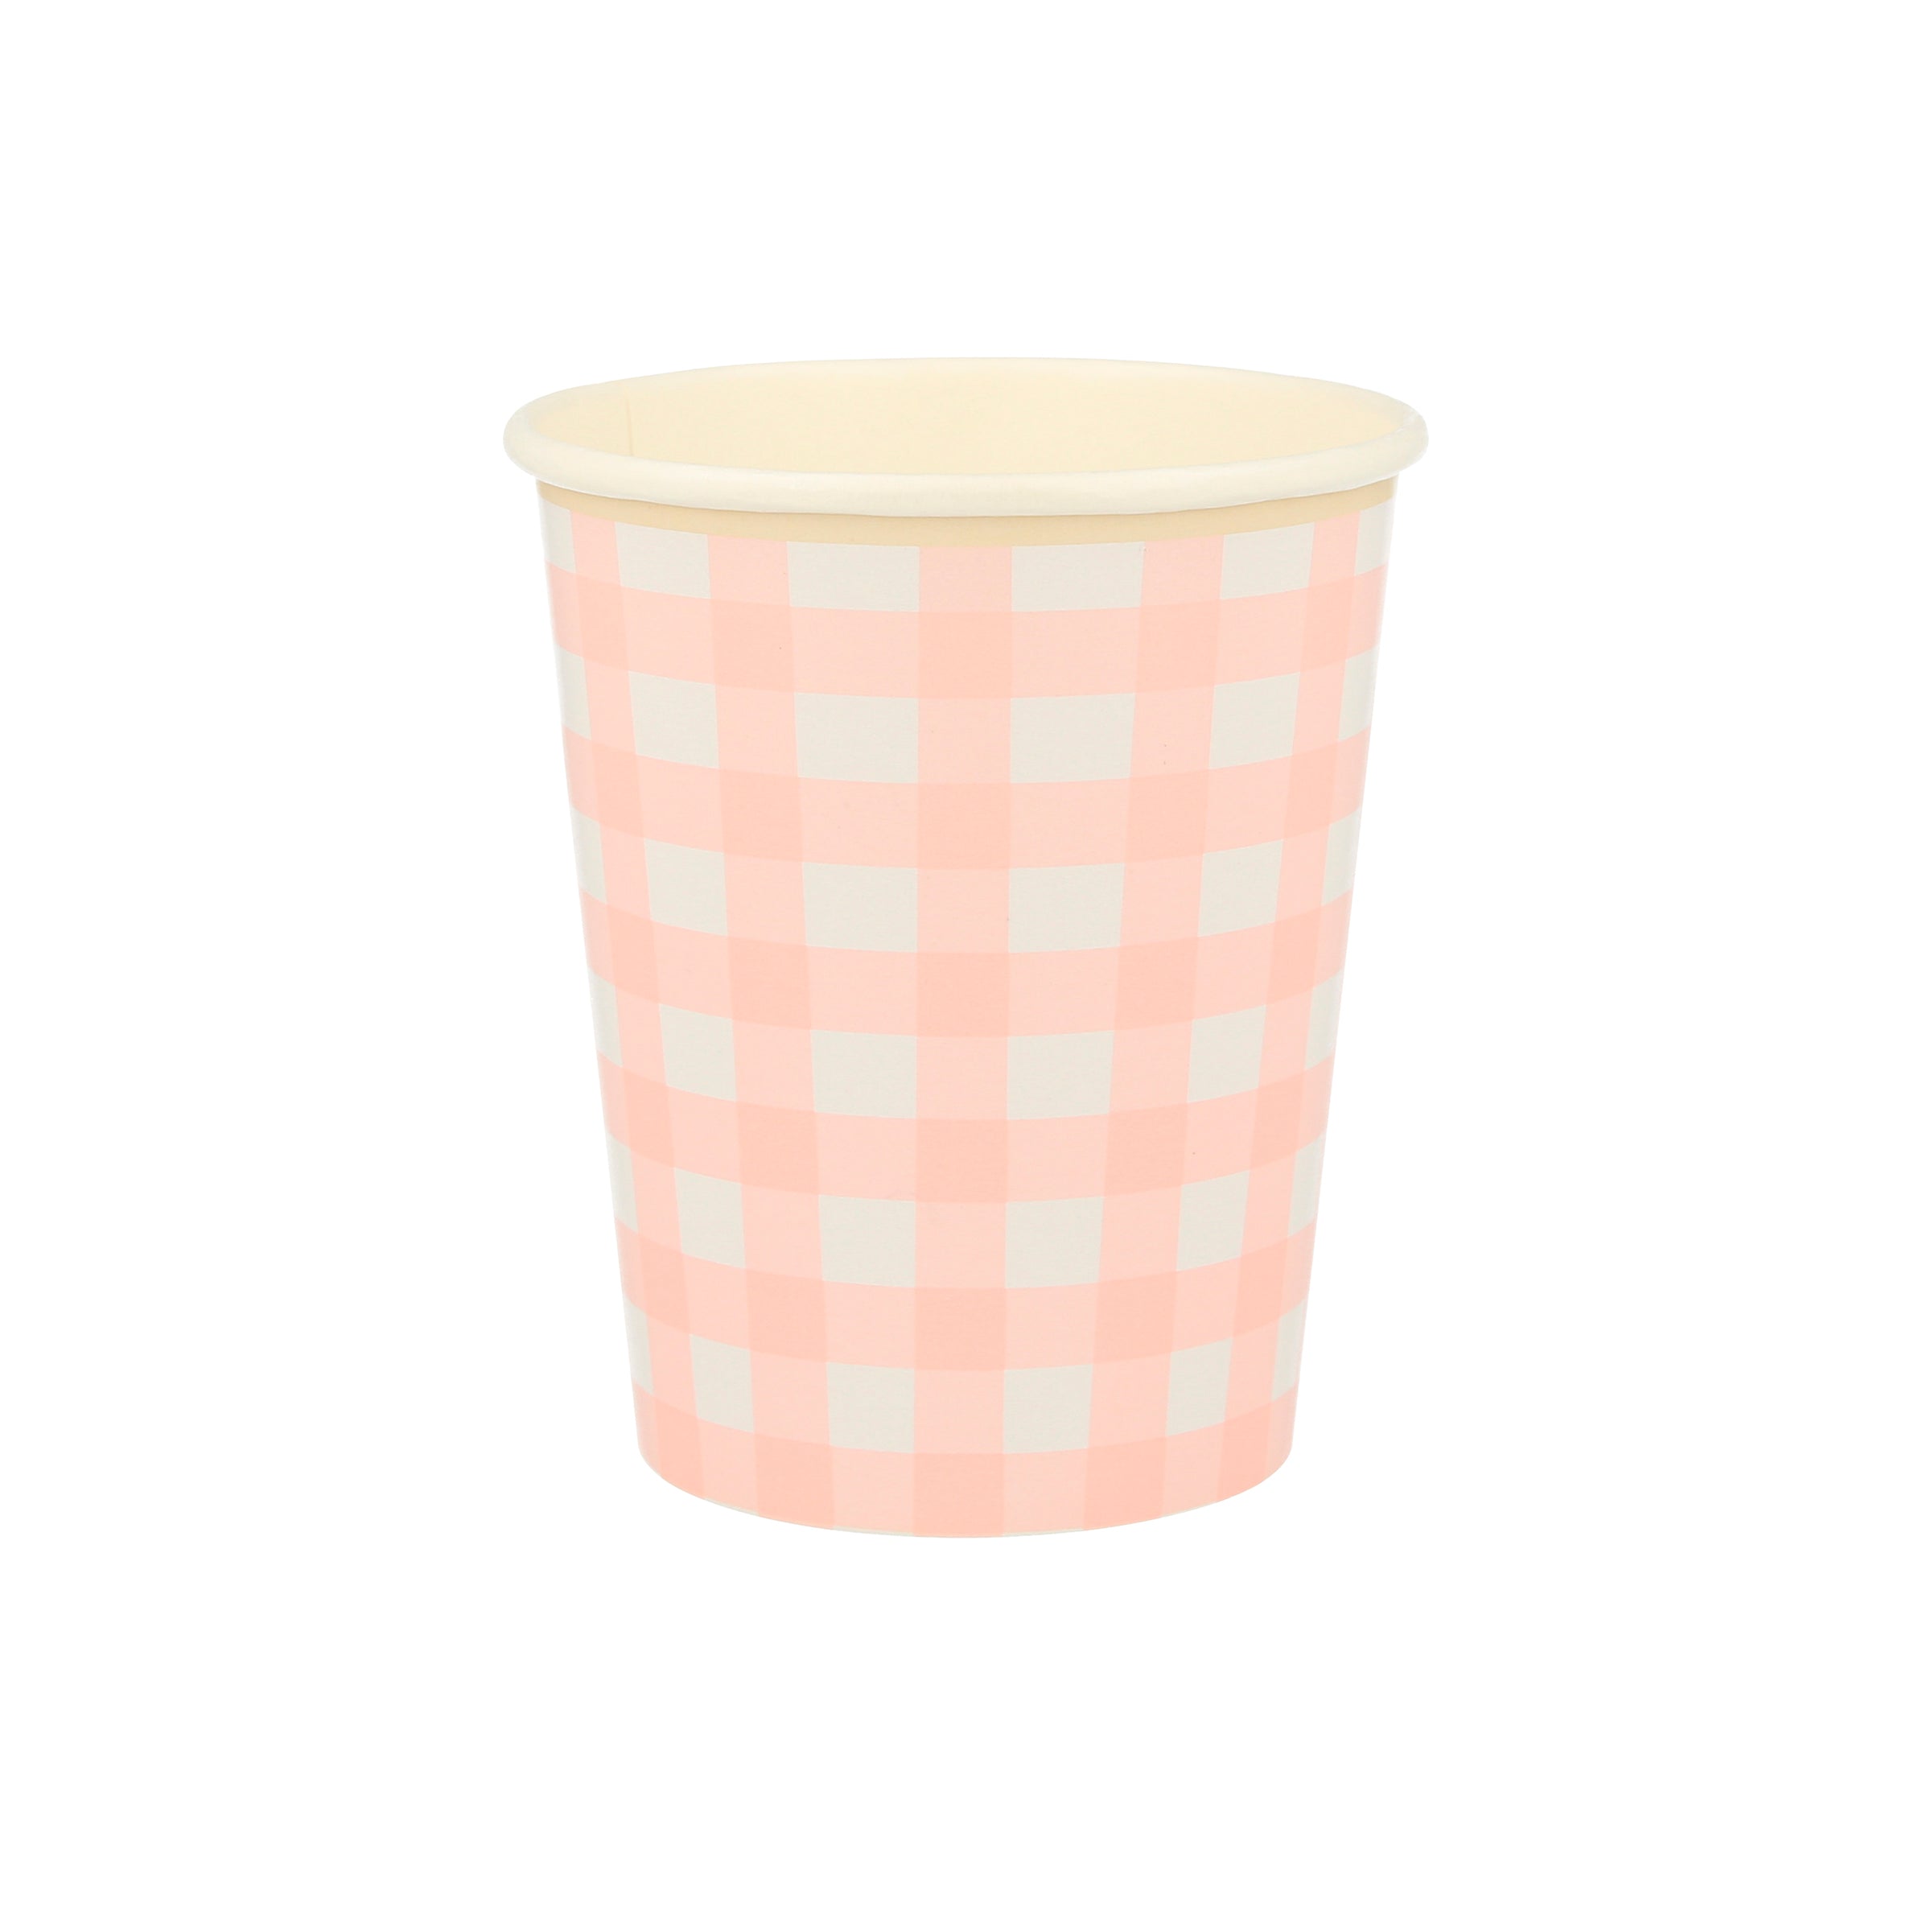 Our paper cups, with a classic gingham print, are perfect as picnic cups.